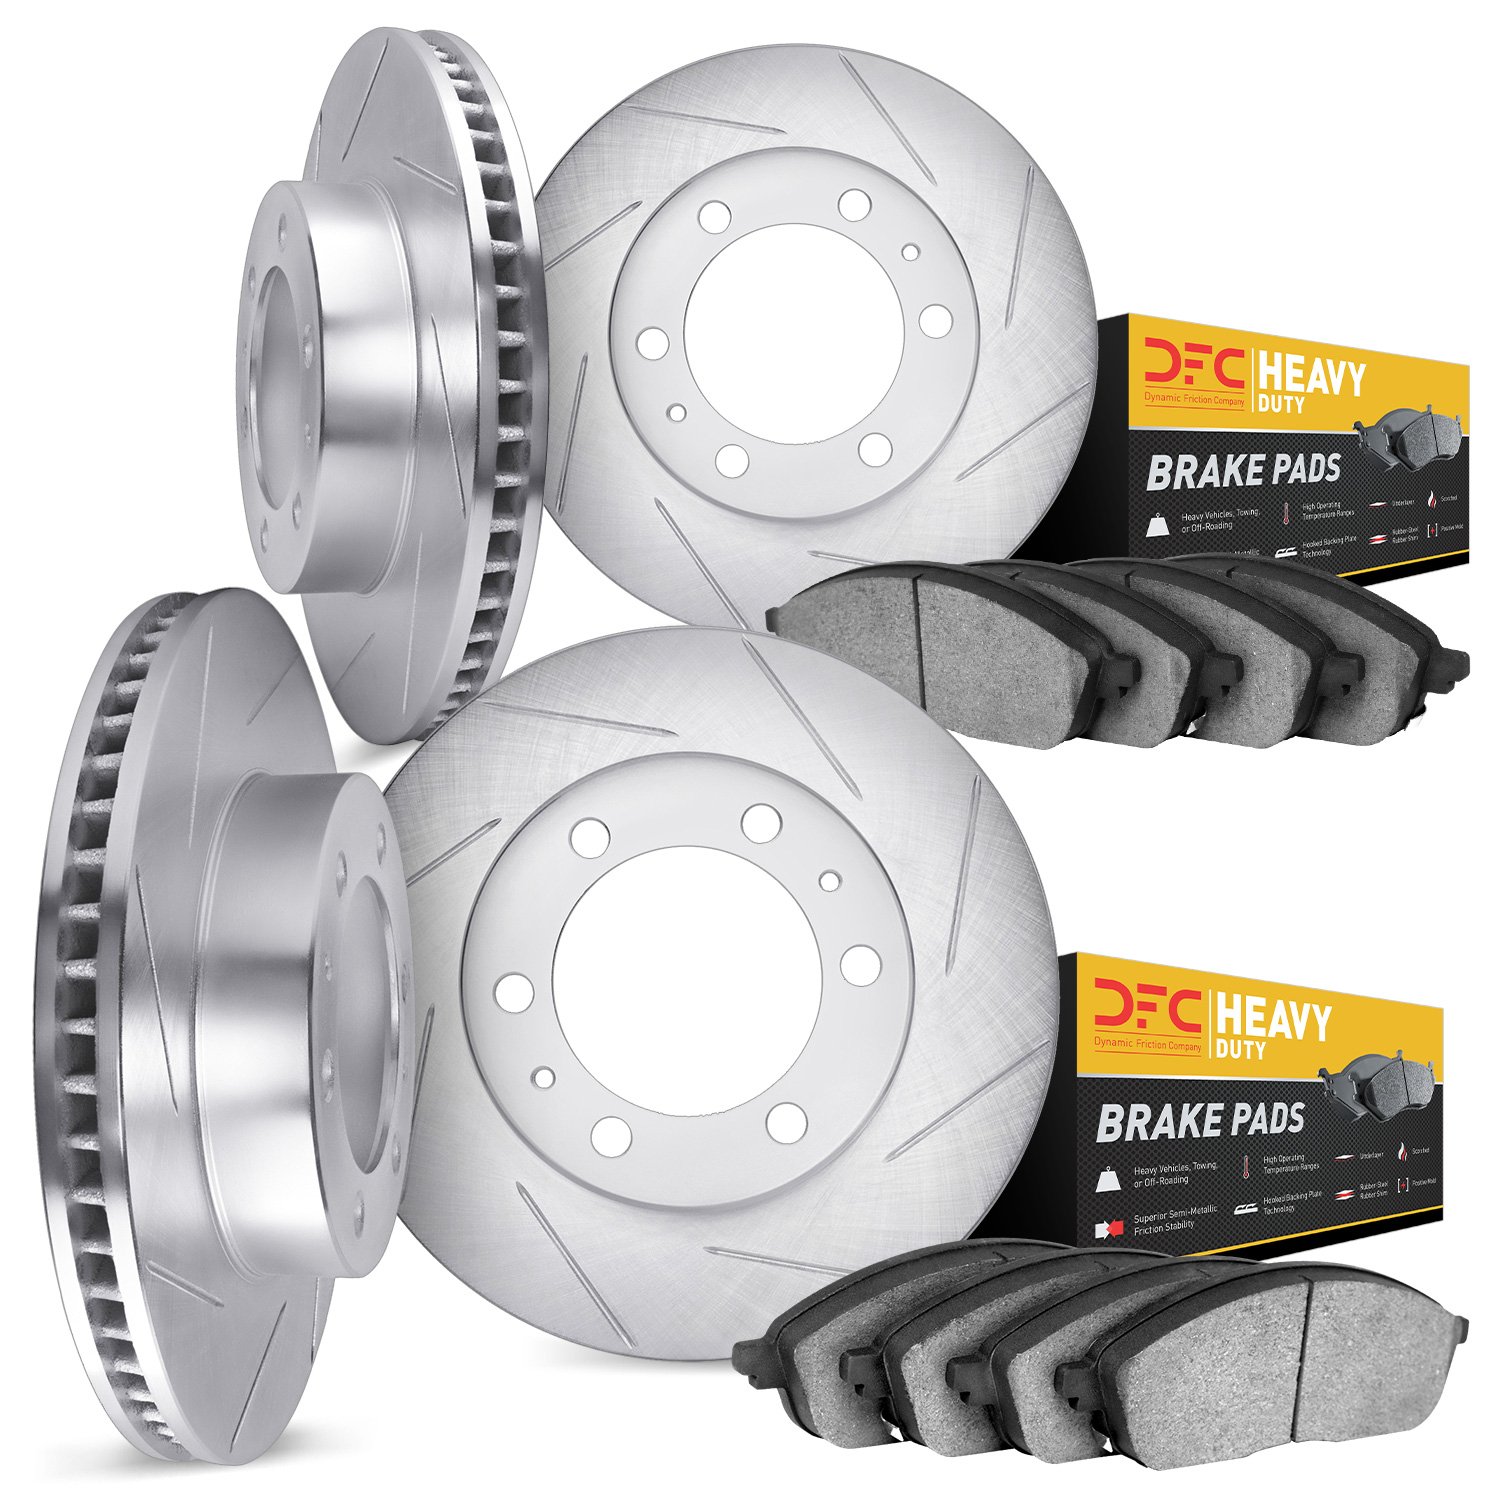 5204-40229 Slotted Brake Rotors w/Heavy-Duty Brake Pads Kits [Silver], 2003-2003 Mopar, Position: Front and Rear